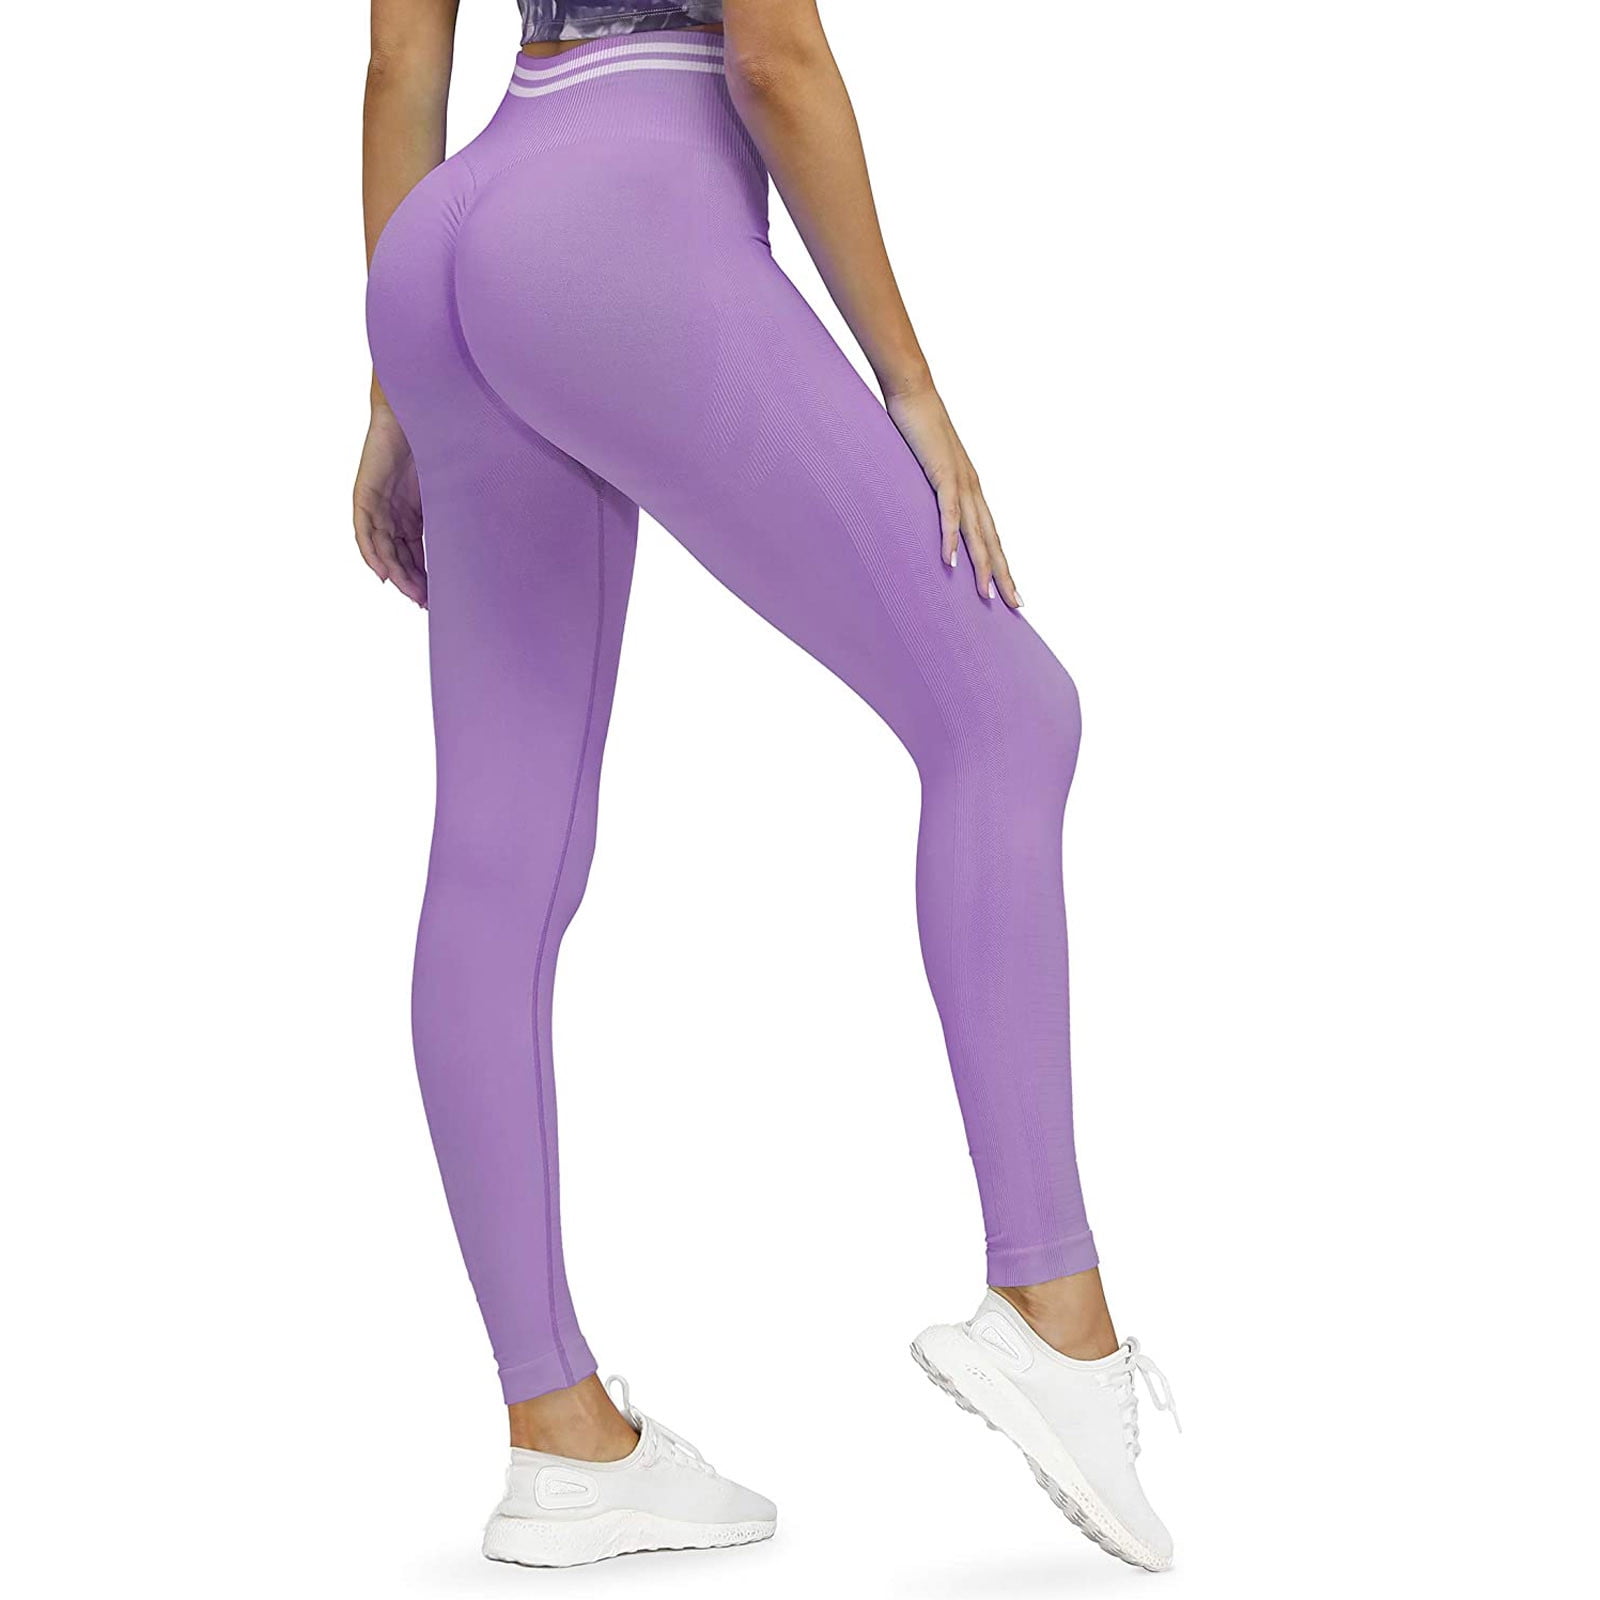 High Waist Solid Color Yoga Pants For Women Elastic Sports Gym All In Motion  Leggings For Fitness And Overall Full Tights Workout From Ablulu568, $13.27